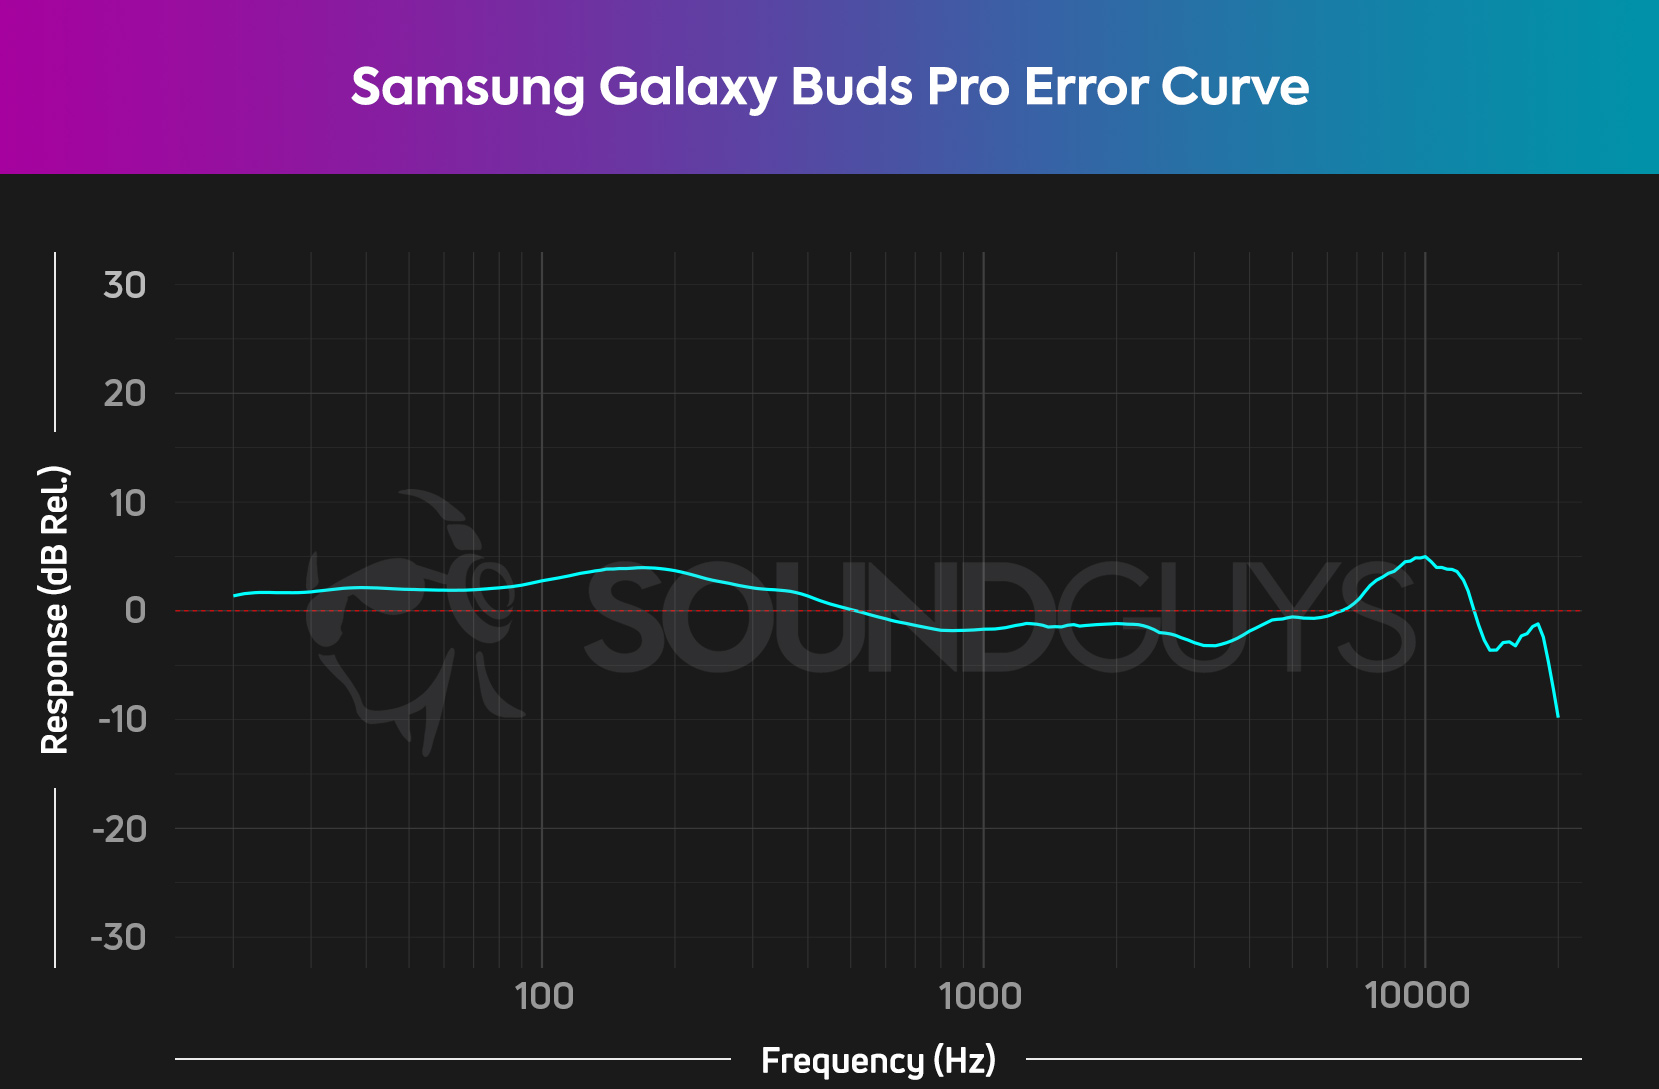 An error curve chart for the Samsung Galaxy Buds Pro.